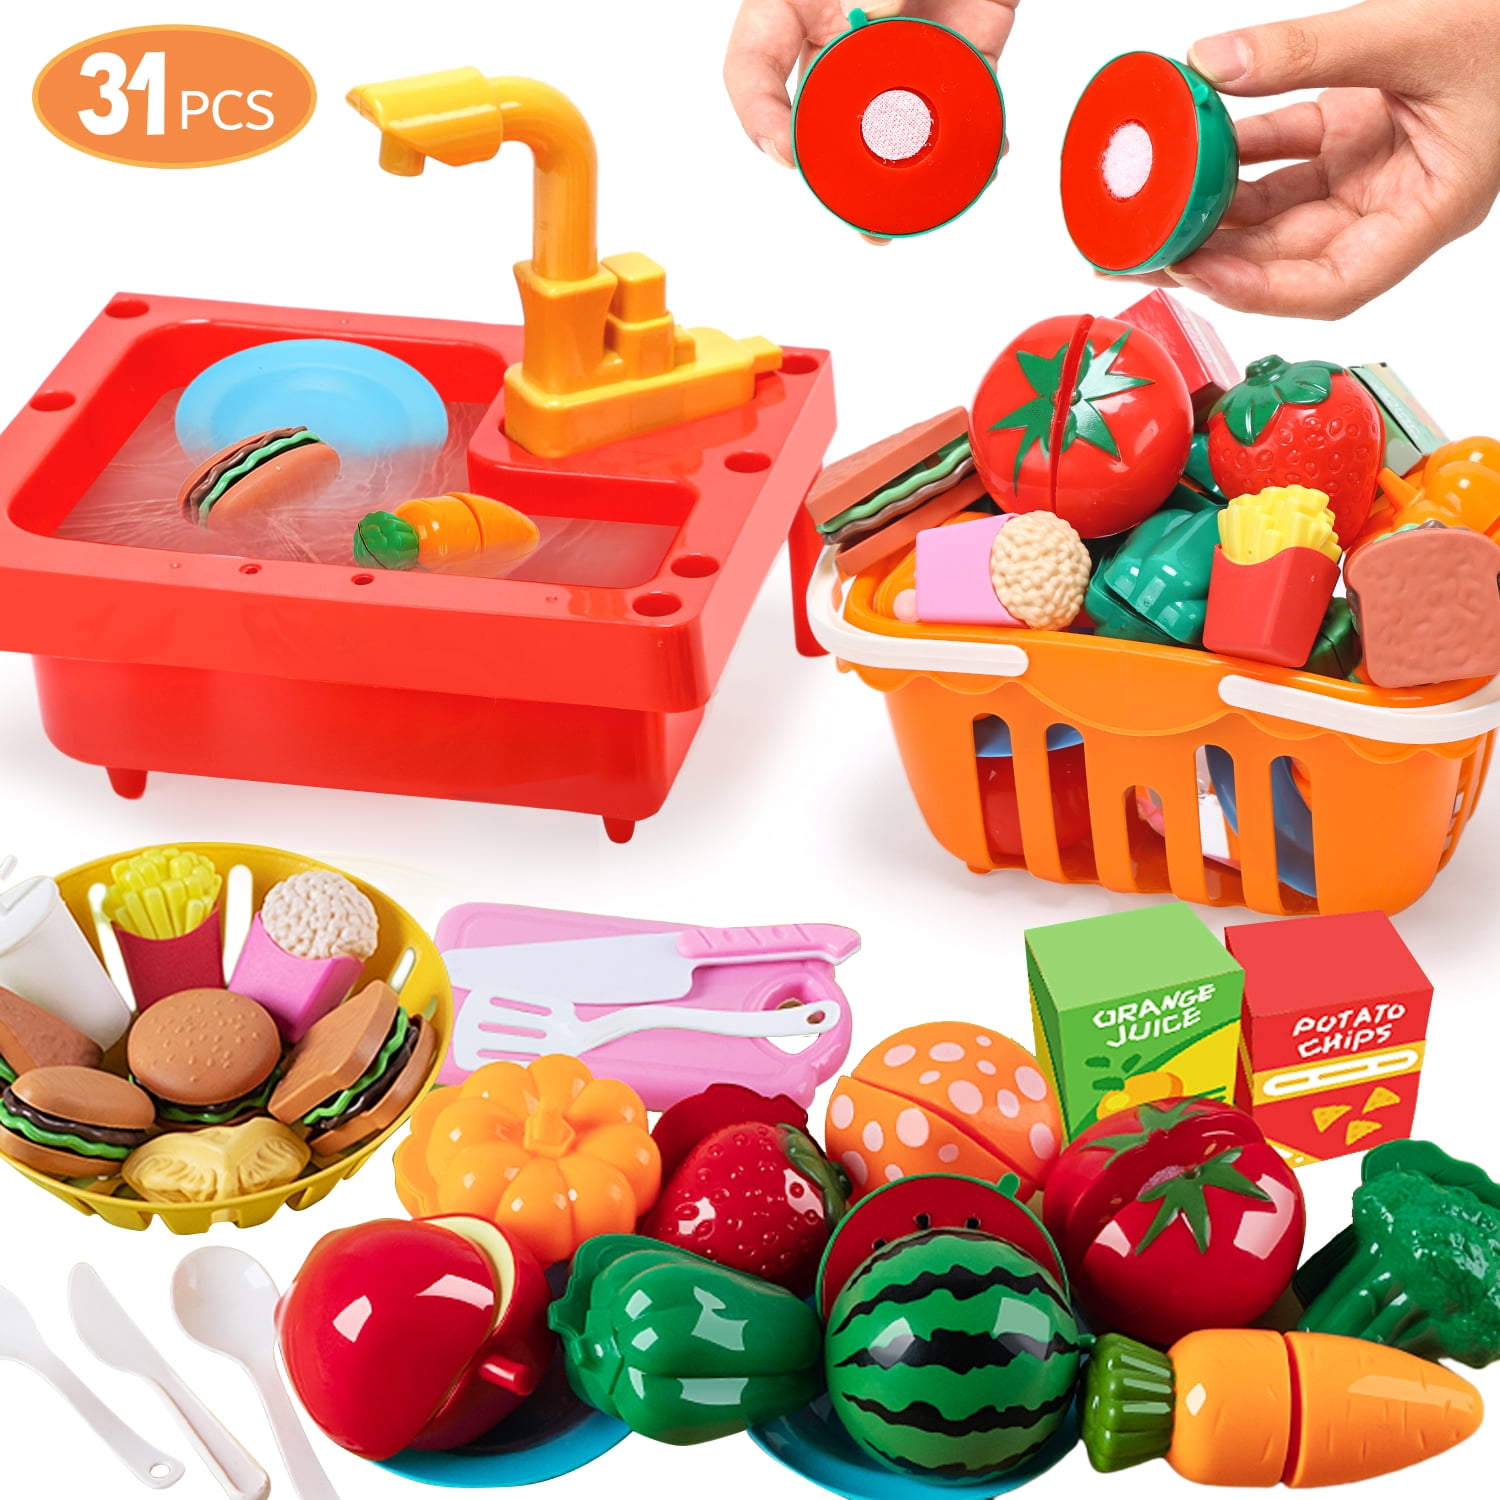 Play Kitchen Accessories For Kids, Play House Pastry Dinner Plate Set,Toddler  Kitchen Playset Play Food Dishes,Montessori Kitchen For Age 3 4 5 6 7 8 9